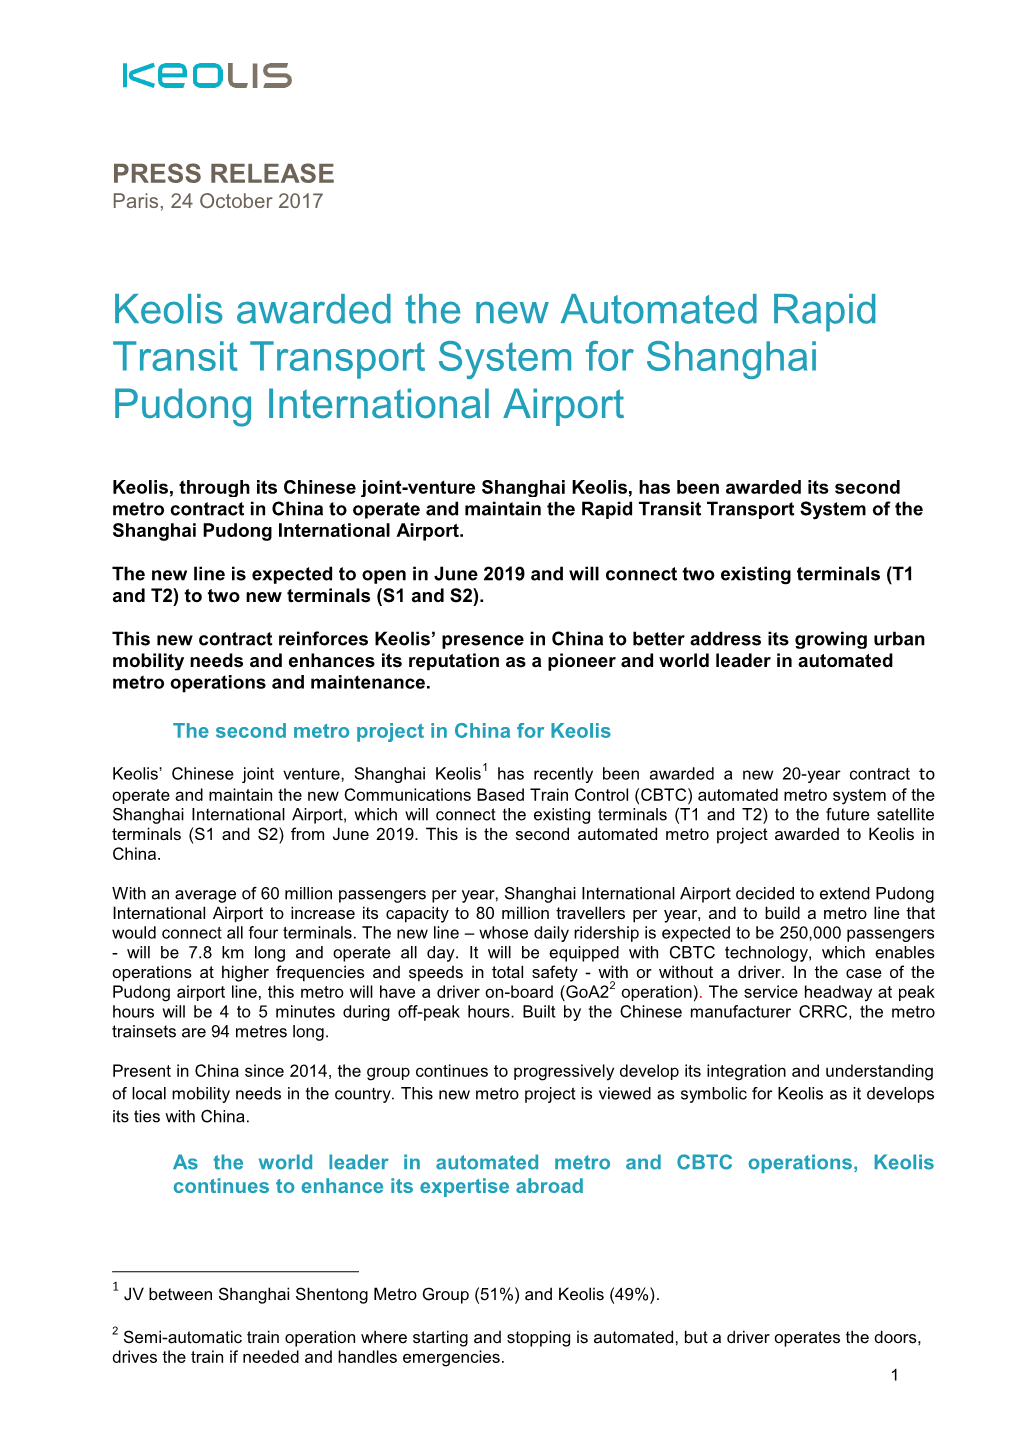 Keolis Awarded the New Automated Rapid Transit Transport System for Shanghai Pudong International Airport